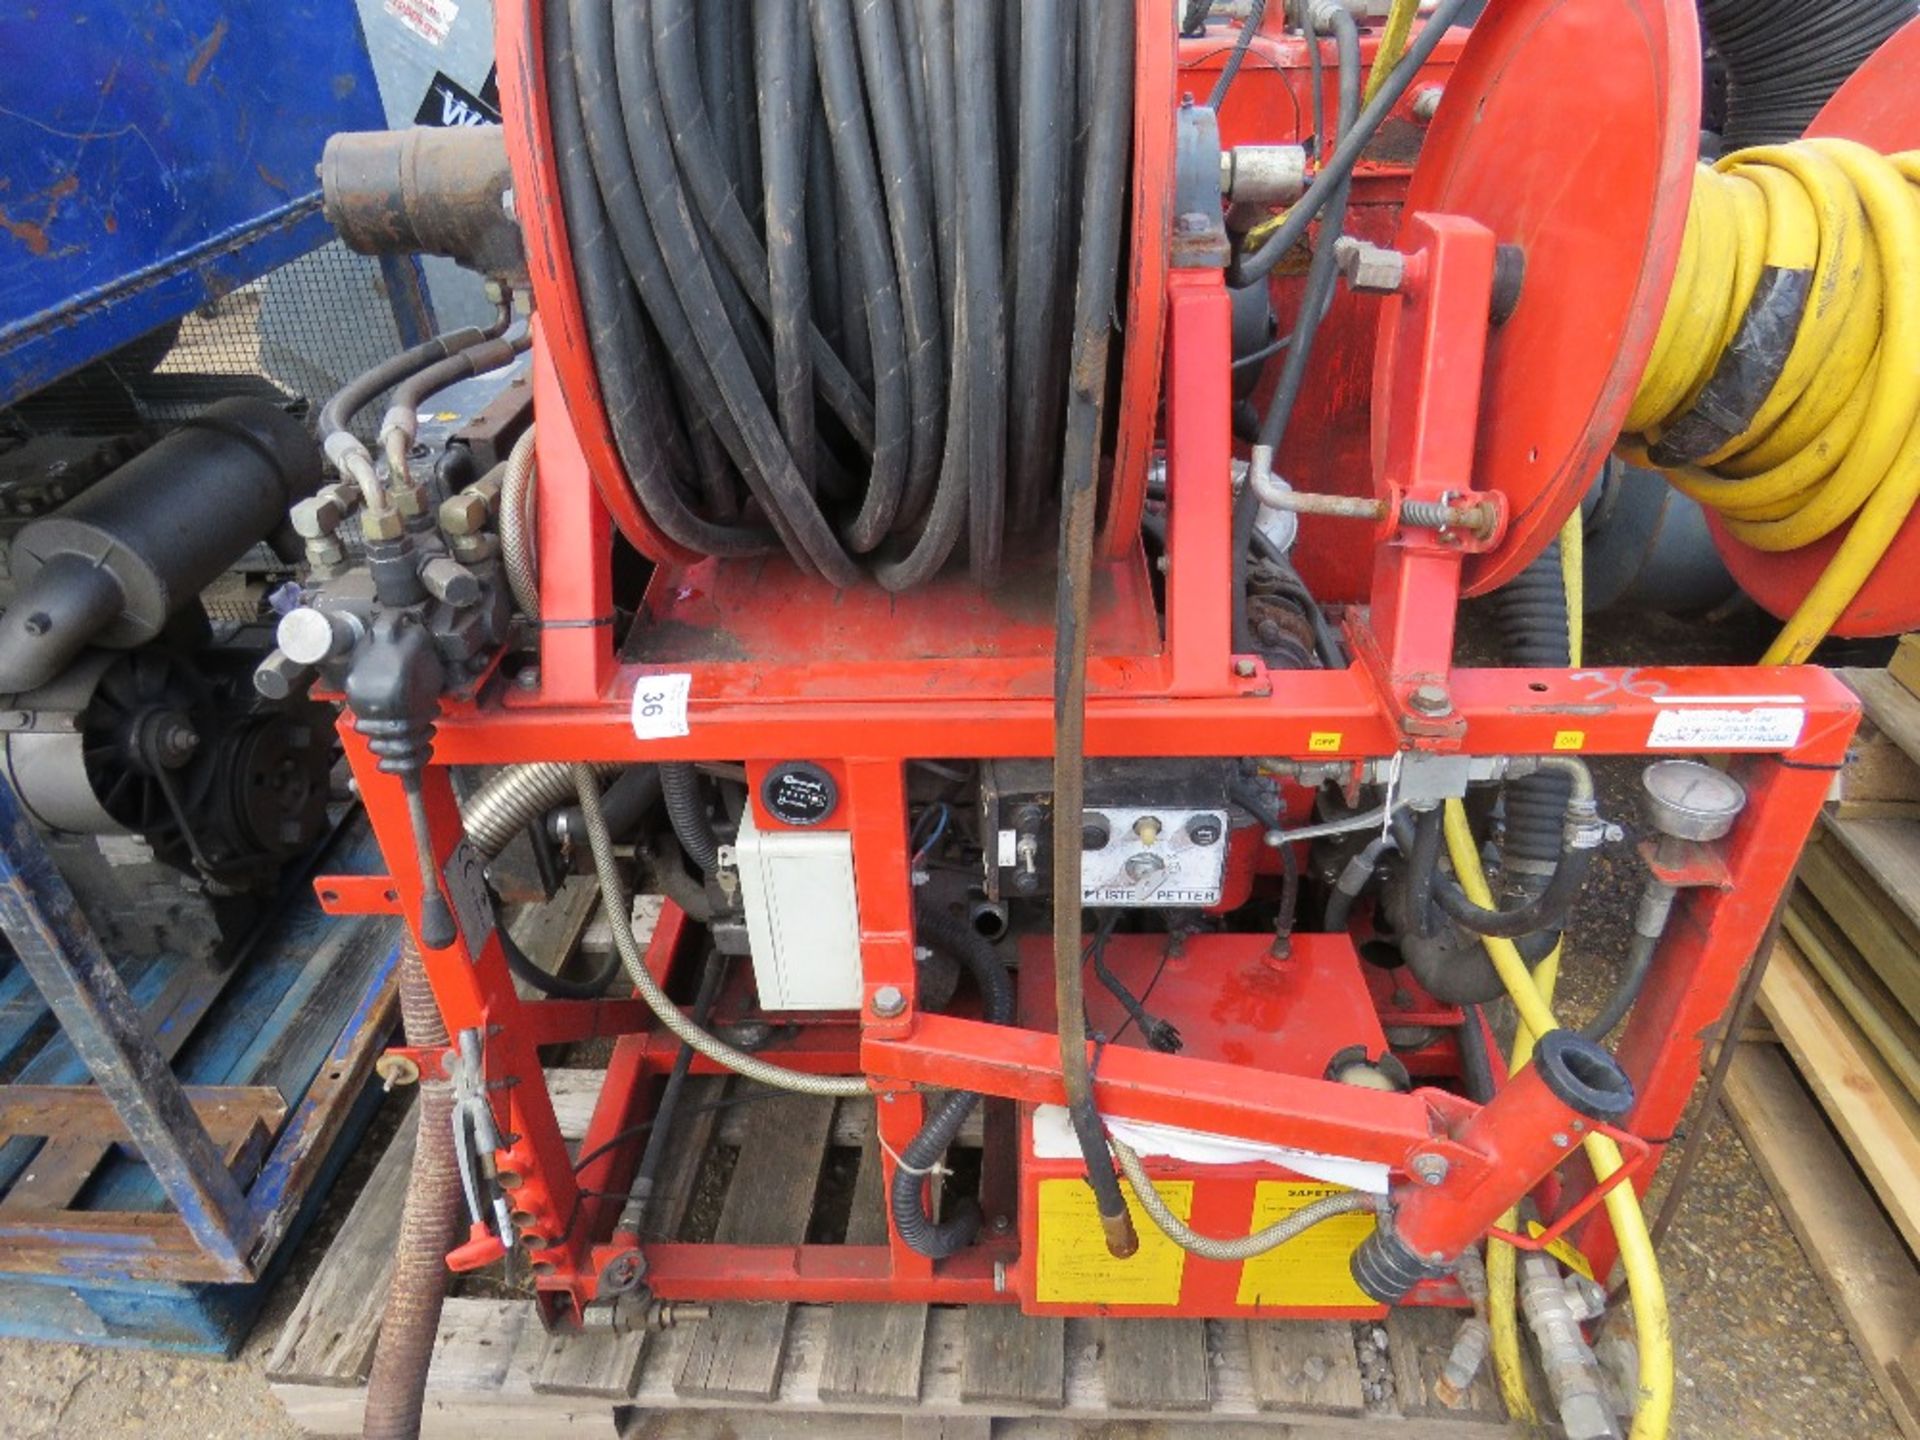 FLEXIAN LISTER 4 CYLINDER DIESEL ENGINED HIGH PRESSURE JETTER/WASHER UNIT, 407 REC HRS. YEAR 1999. U